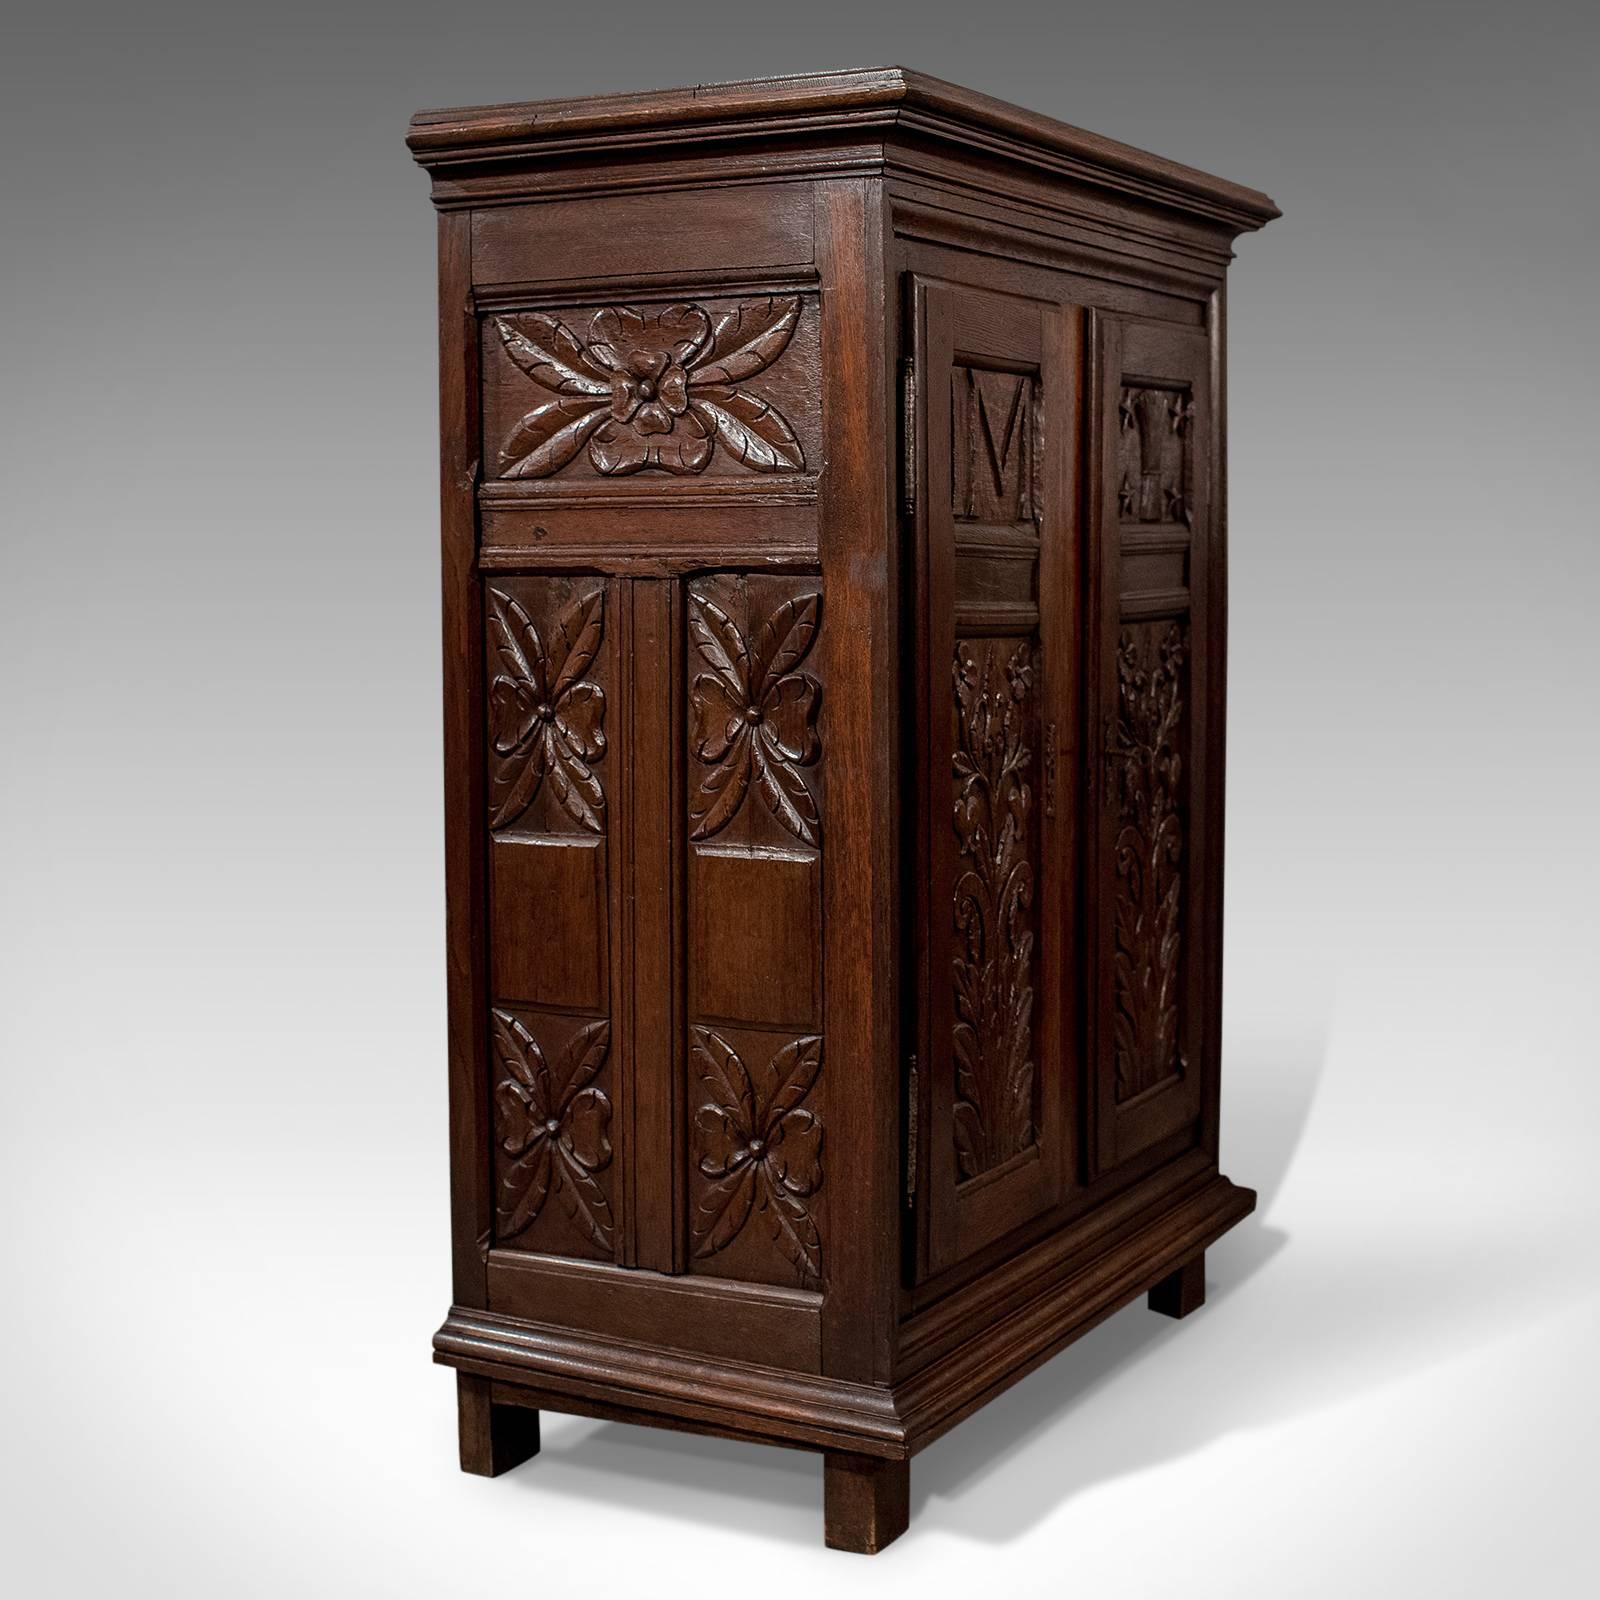 French Provincial French Antique Side Cabinet, 19th Century Oak Cupboard, circa 1900